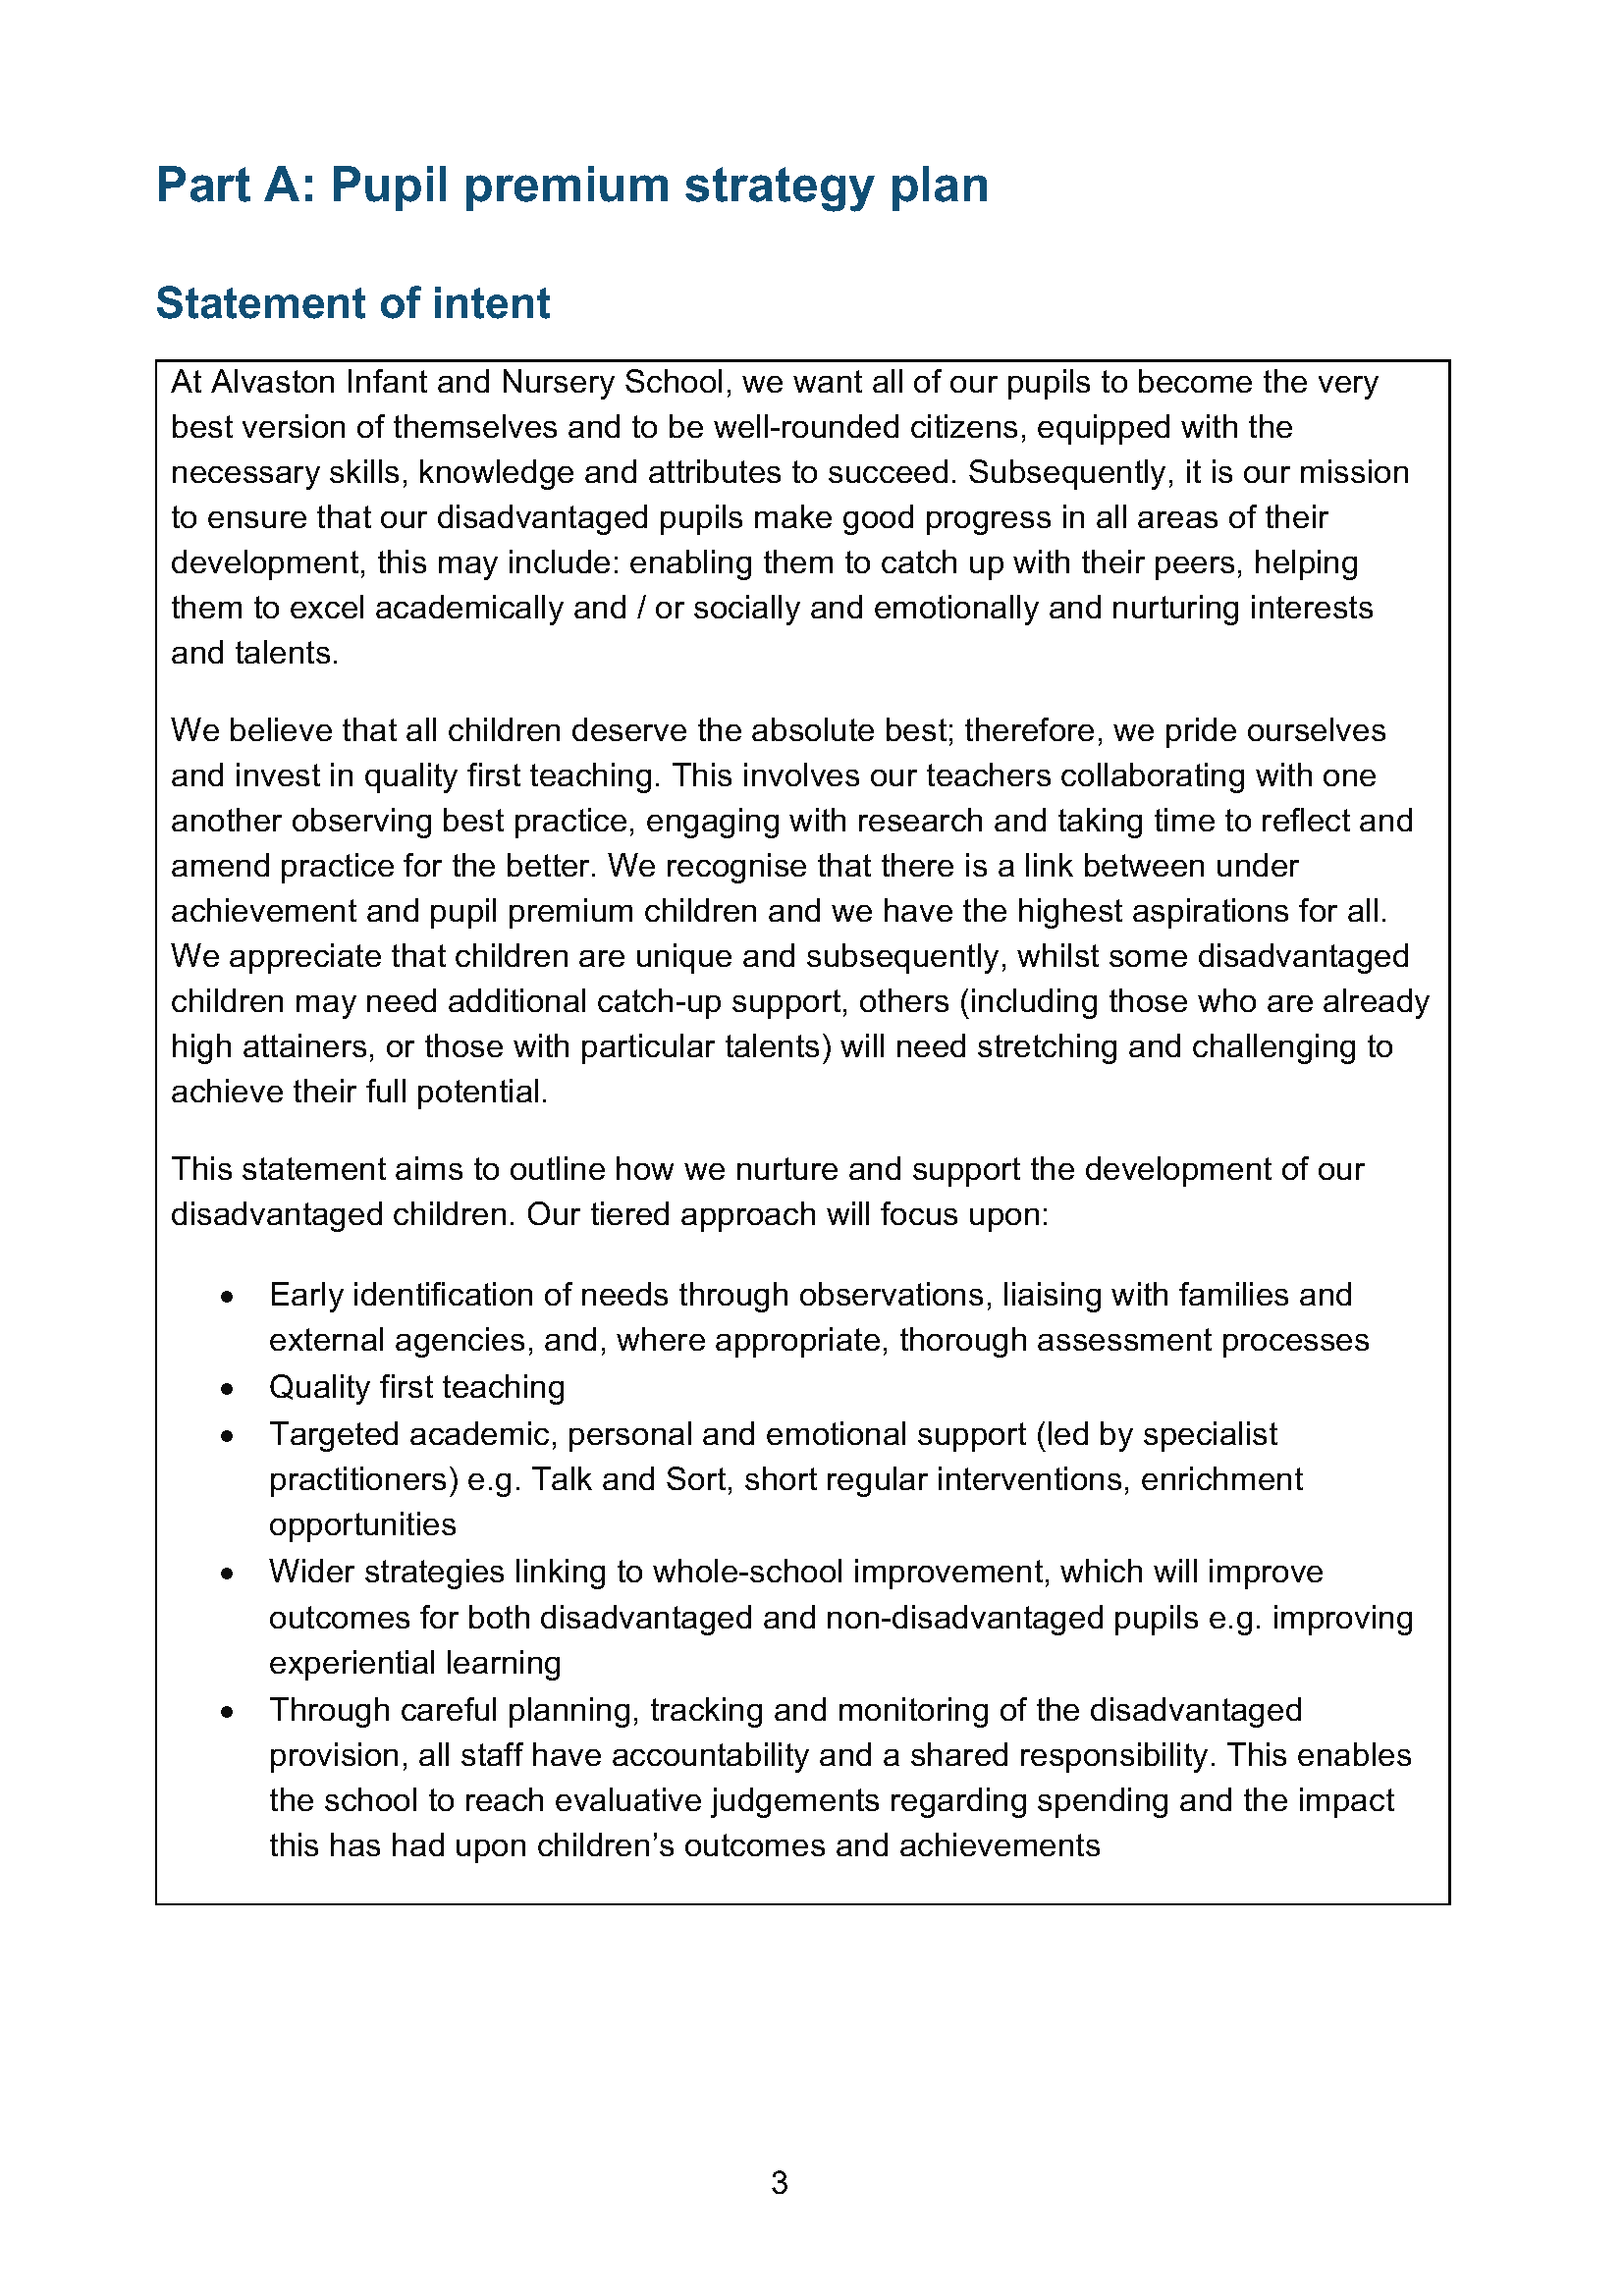 AIS Pupil Premium Strategy Plan 2022 - UPDATED NEW17.10.22_Page_03.png